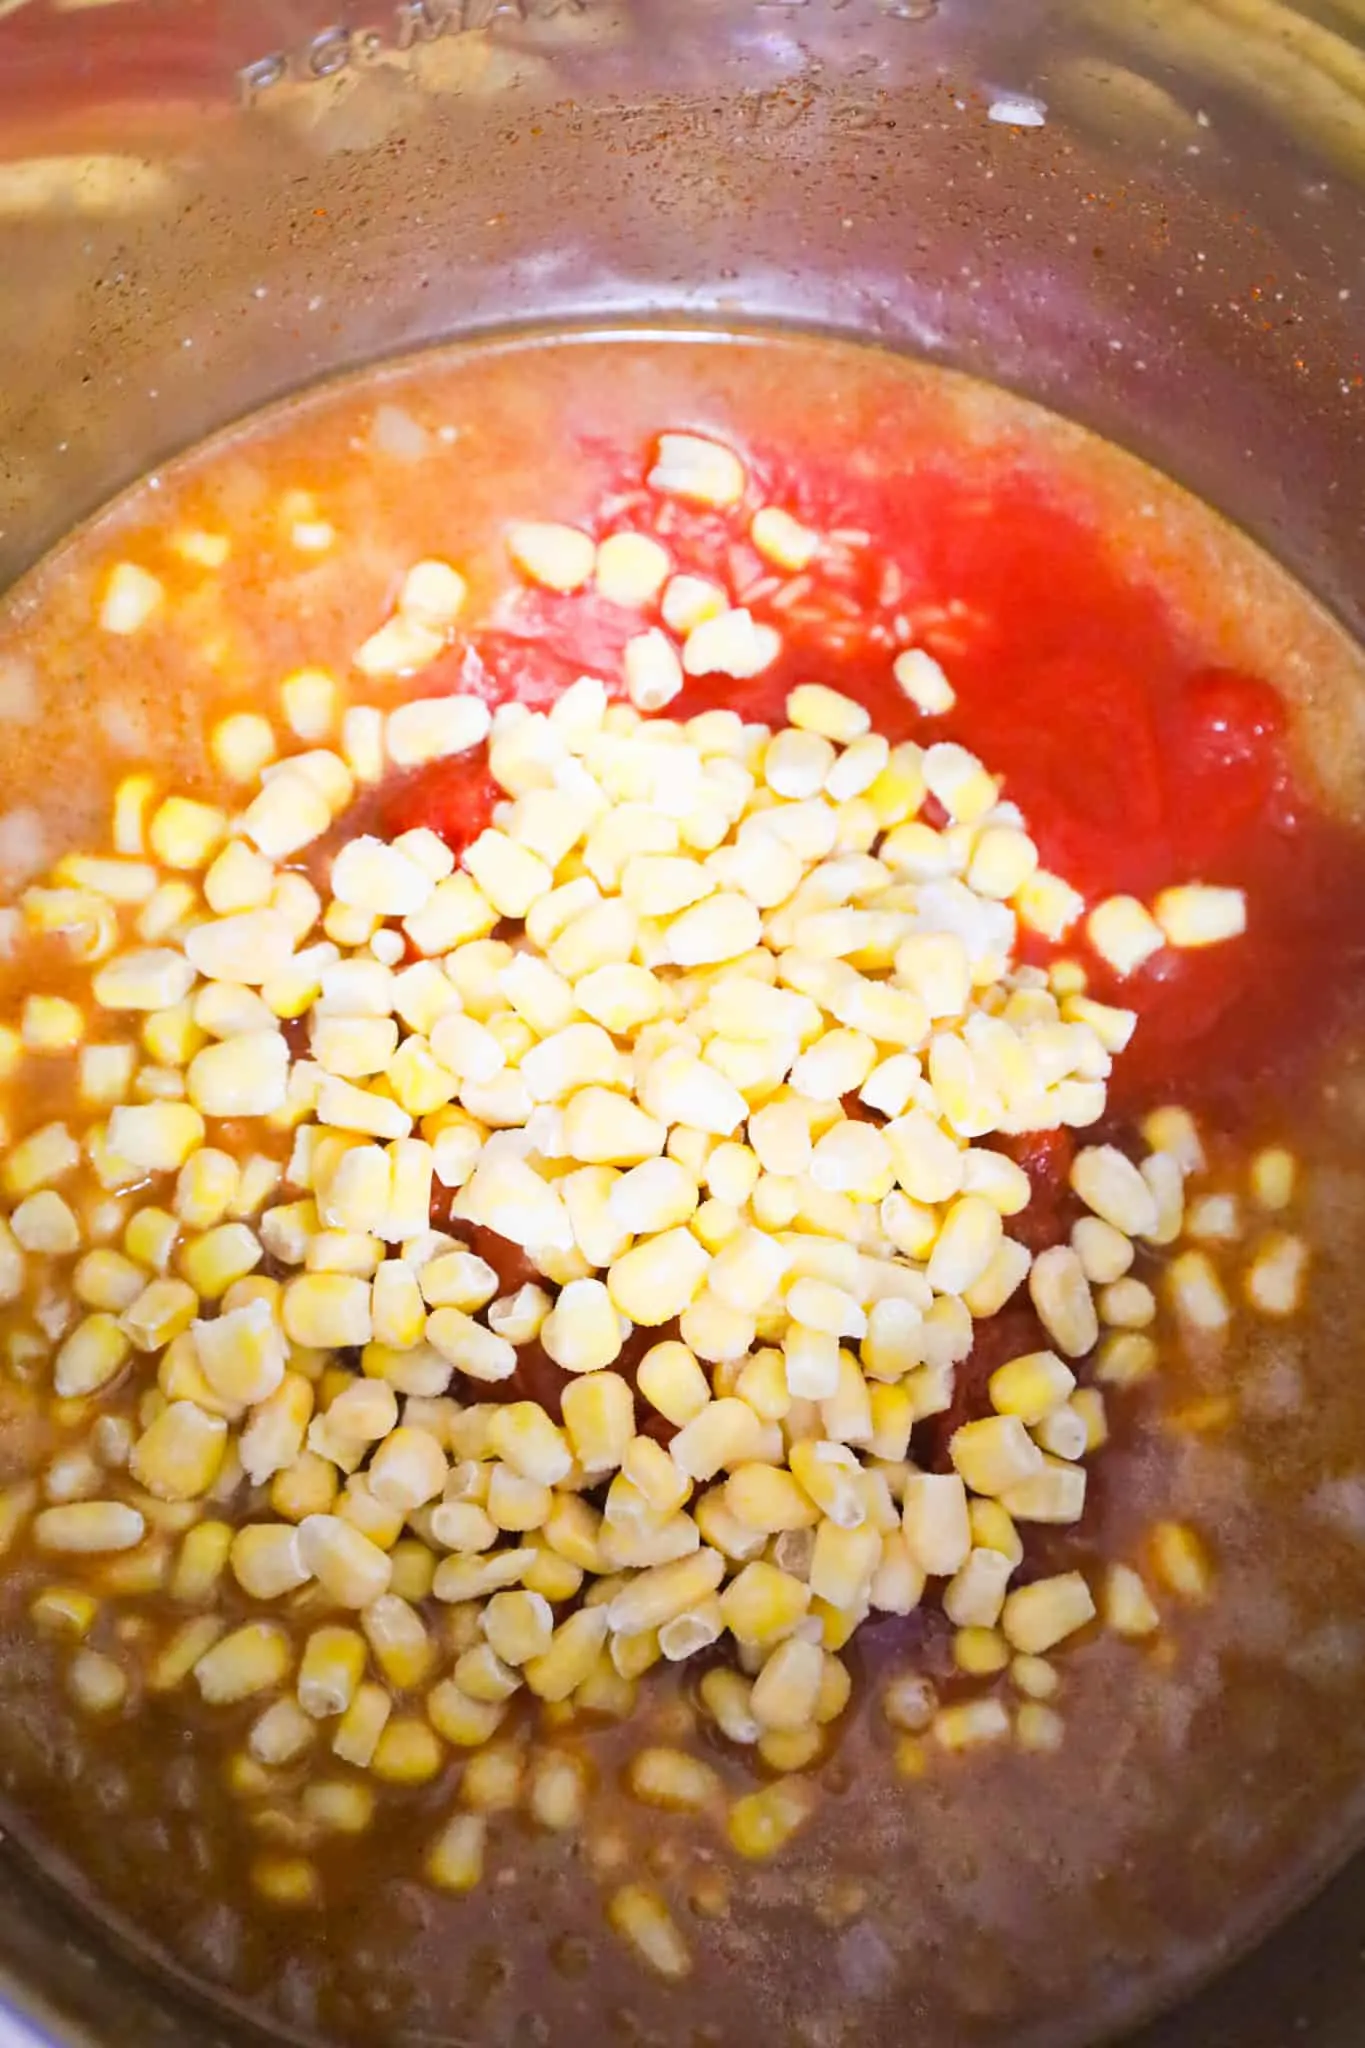 frozen corn kernels on top of Rotel, tomato sauce, chicken broth and rice